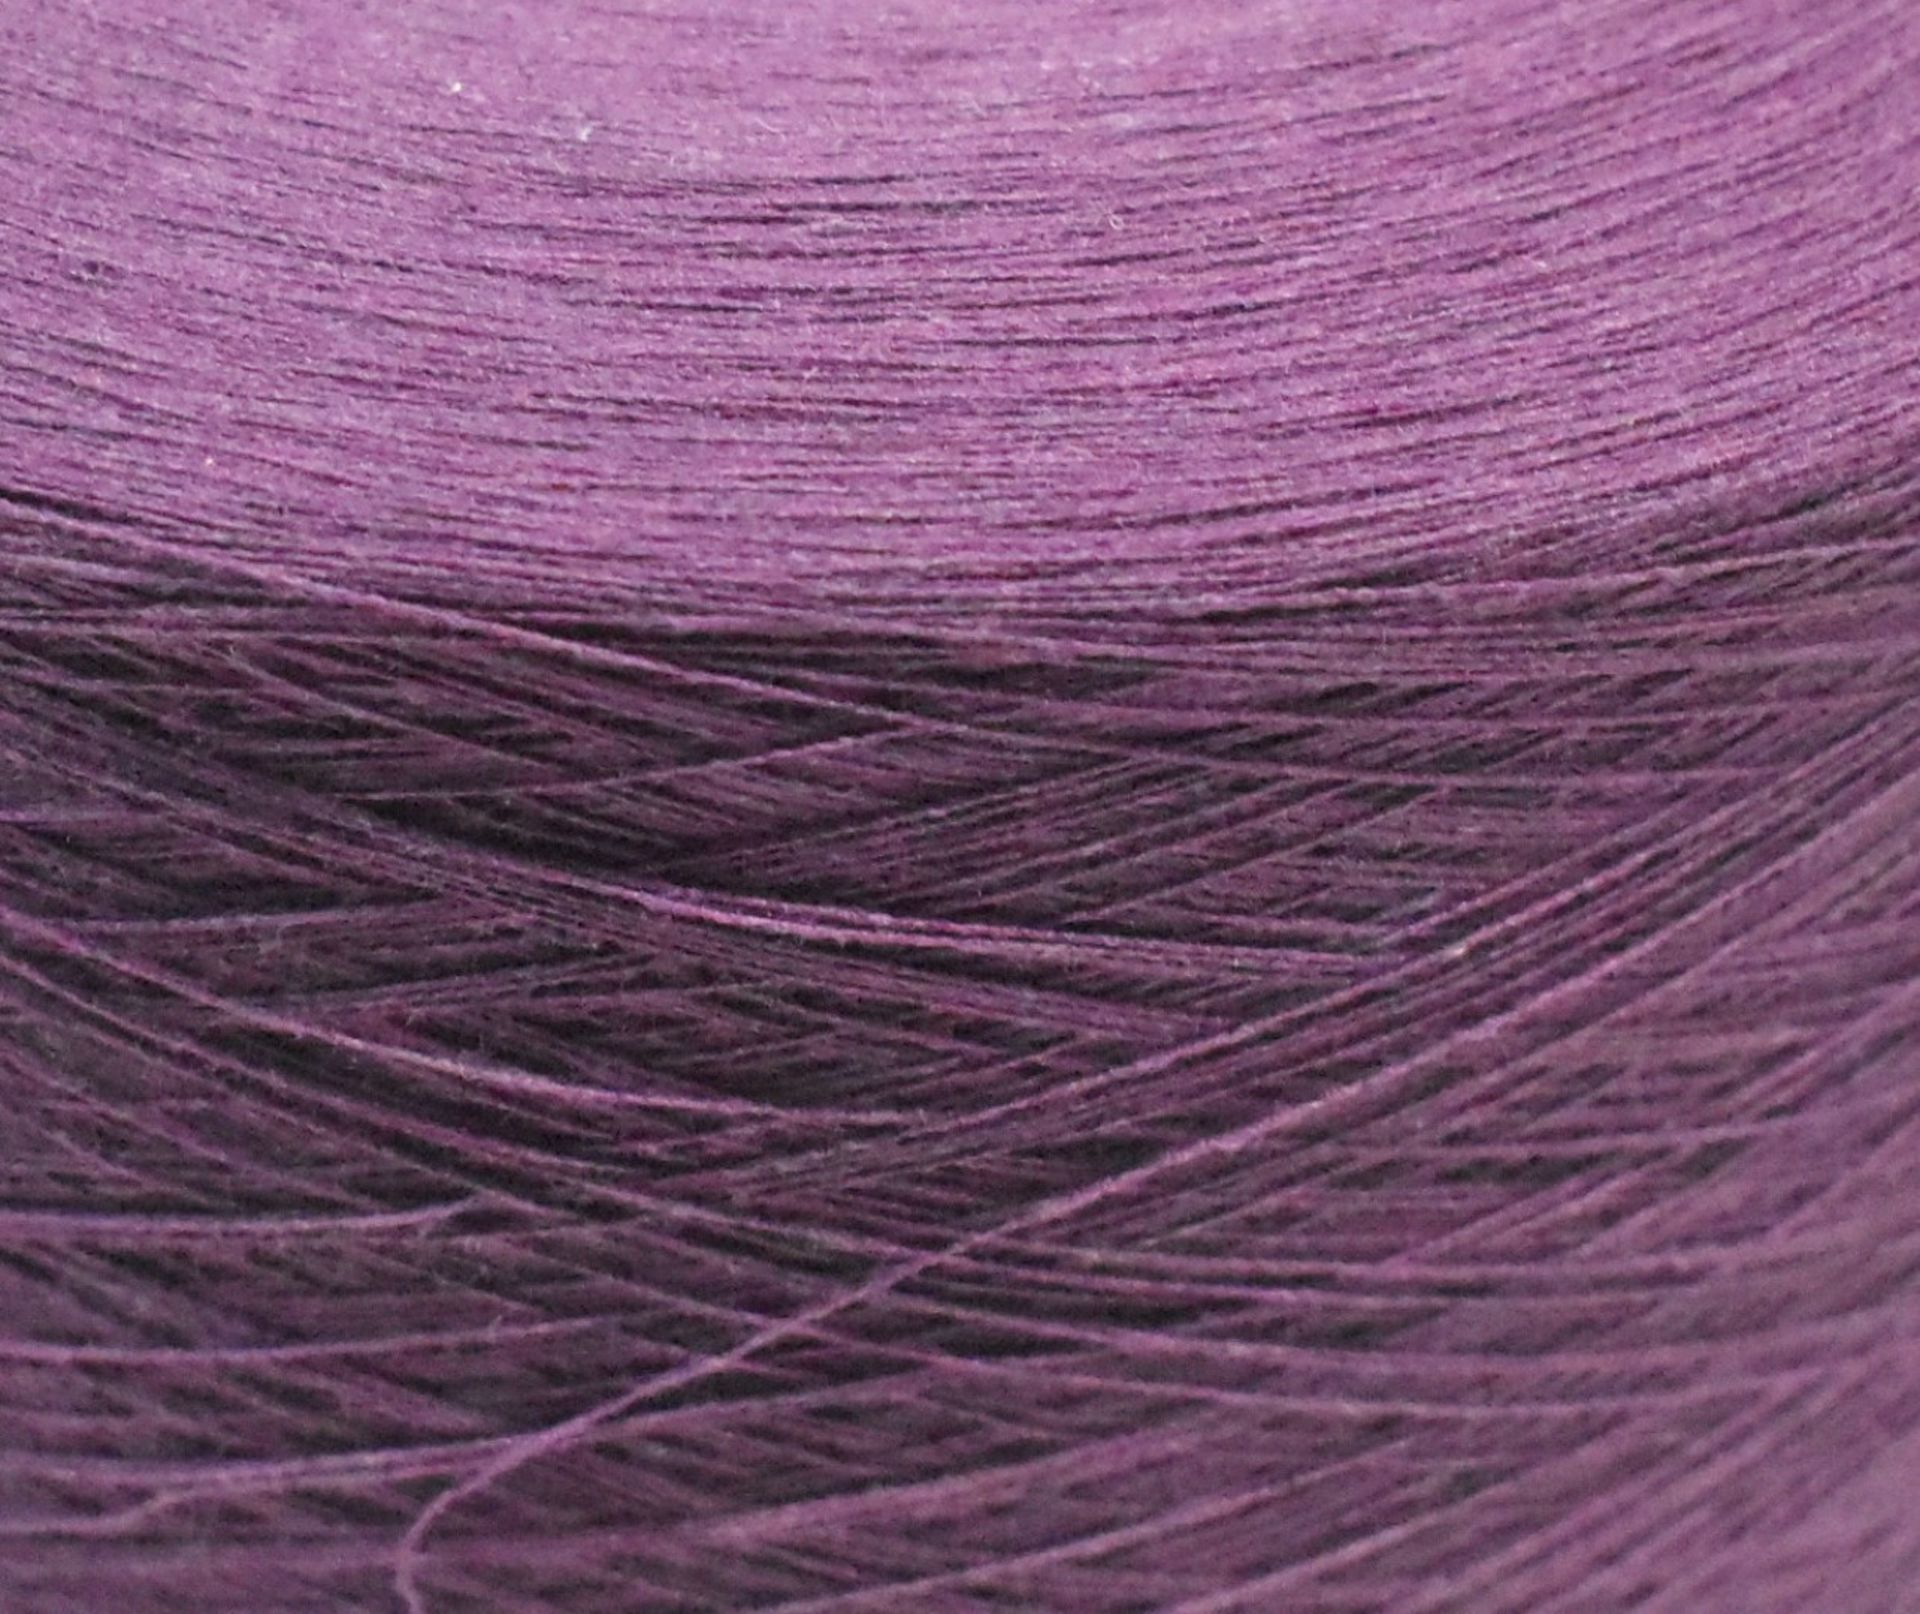 1 x Cone of 1/13 MicroCotton Knitting Yarn - Purple - Approx Weight: 2,300g - New Stock ABL Yarn - Image 6 of 13